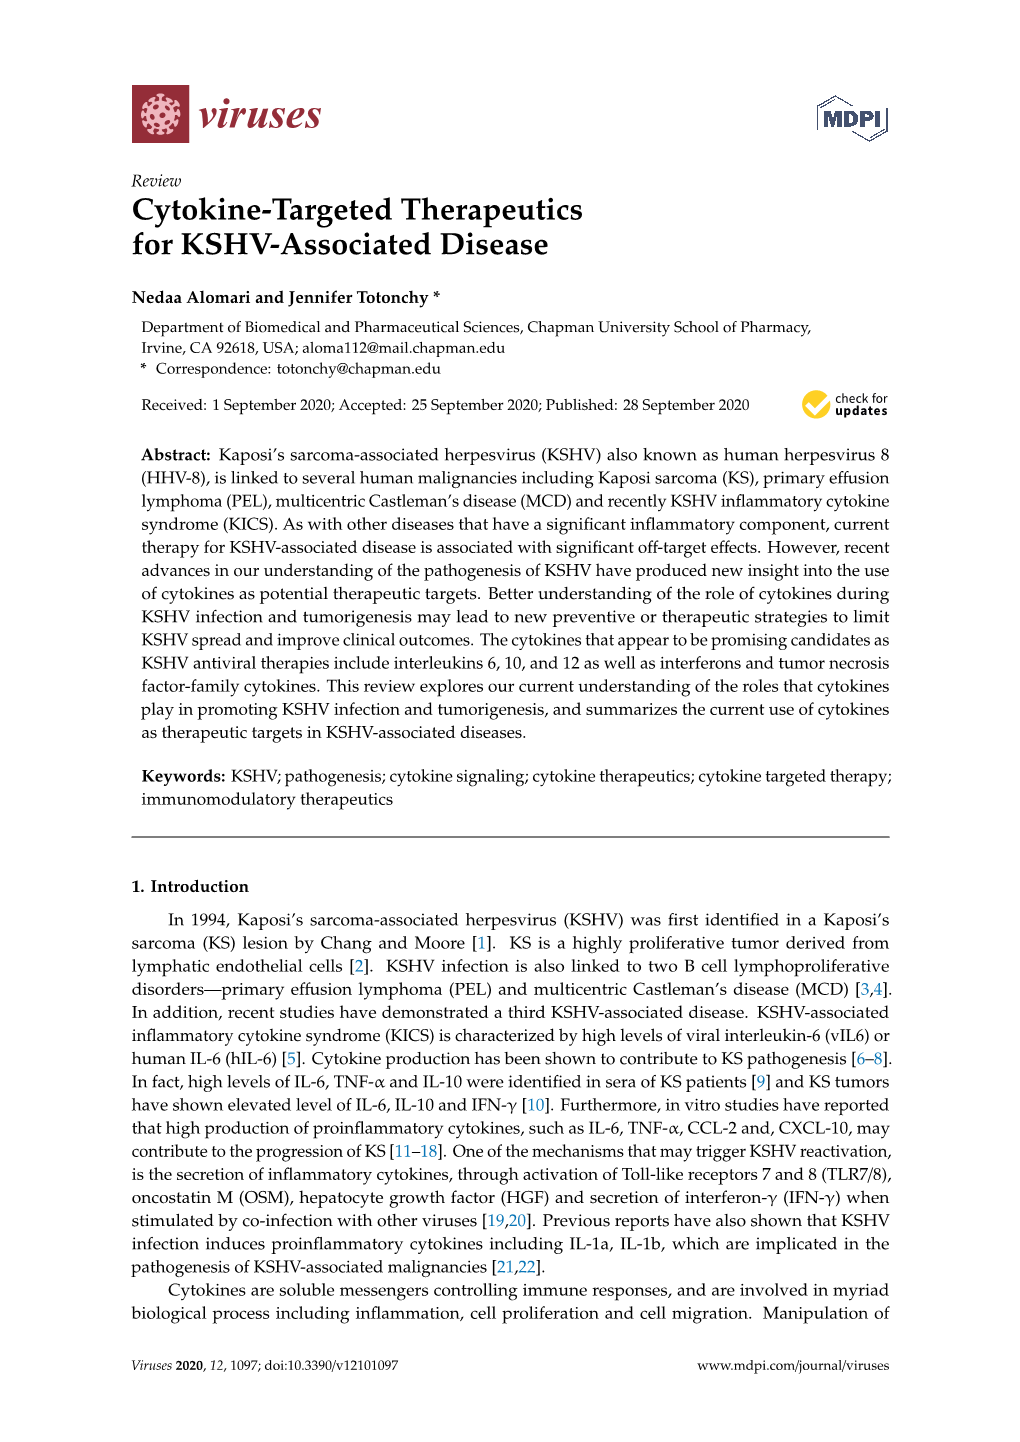 Cytokine-Targeted Therapeutics for KSHV-Associated Disease